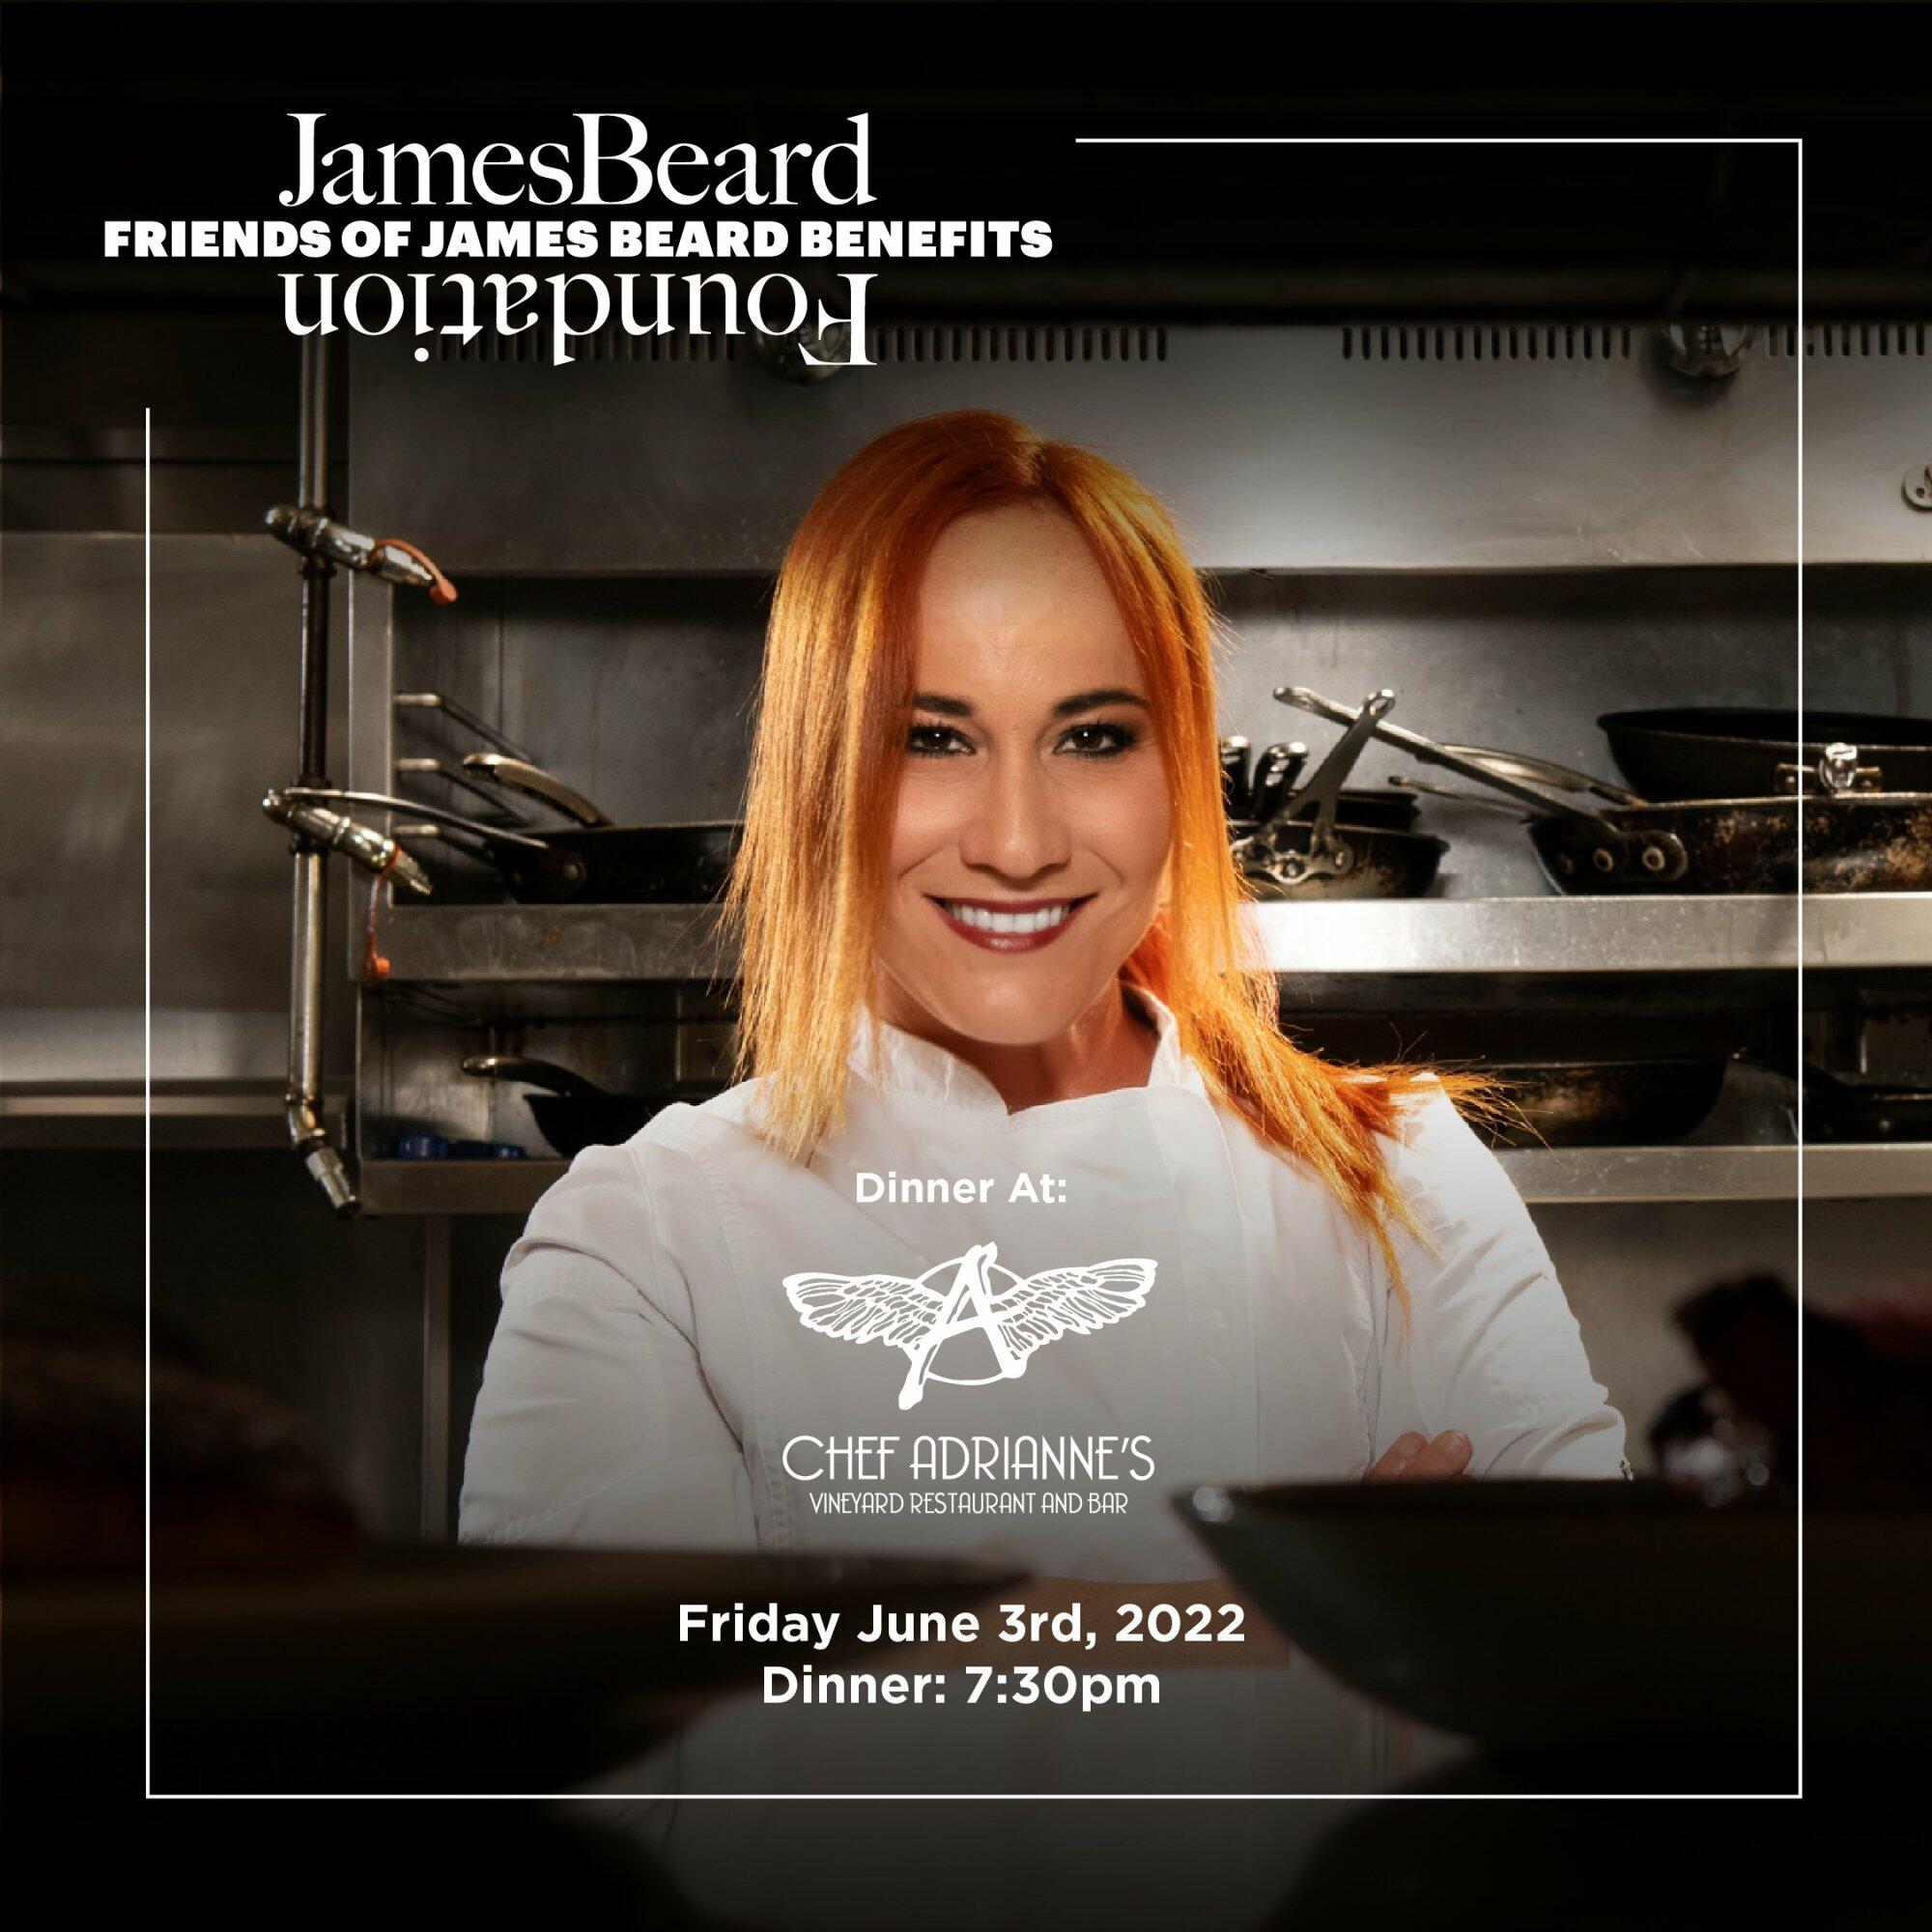 Chef Adrianne Celebrates 15 years of Maximum Flavor with a Friends of James Beard Benefit Dinner at Flagship Restaurant